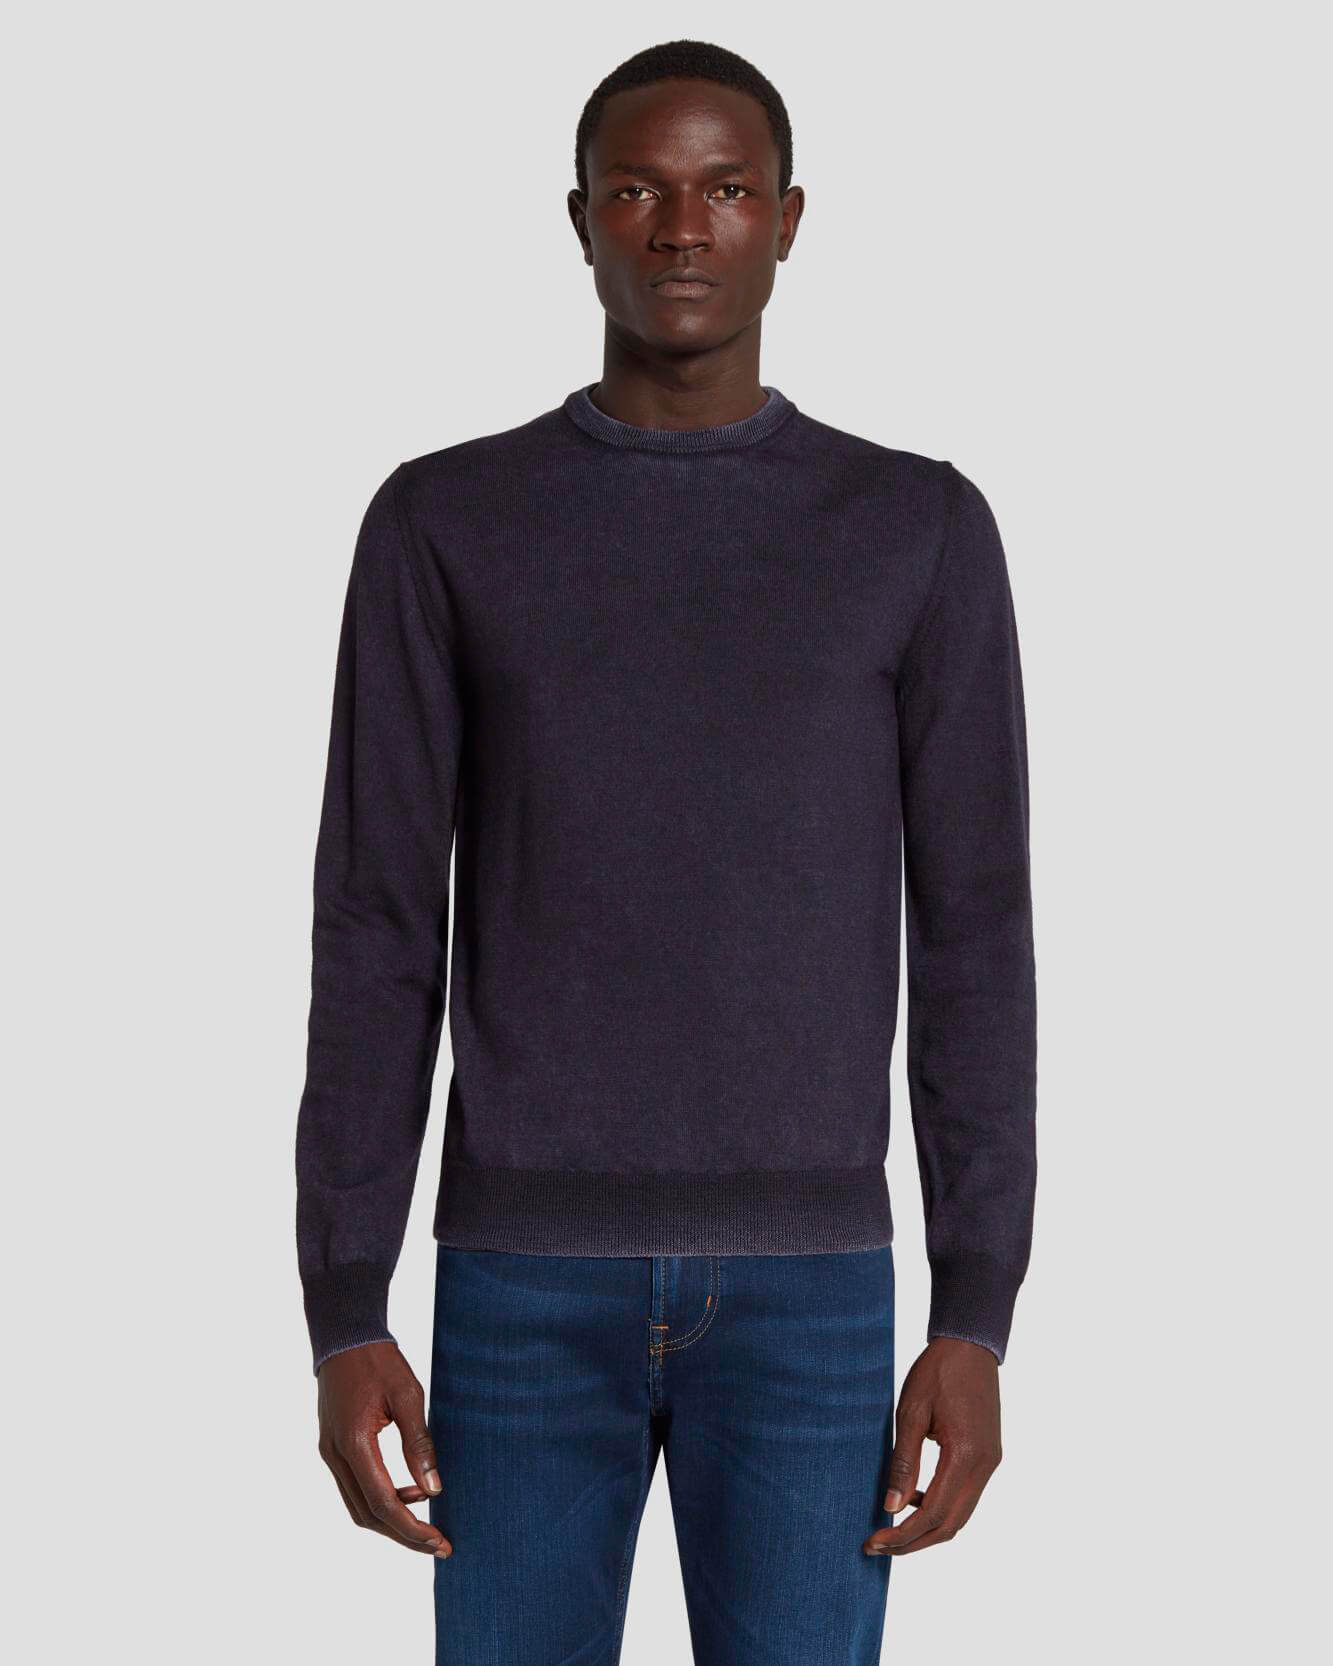 Merino Wool Sweater in Navy | 7 For All Mankind